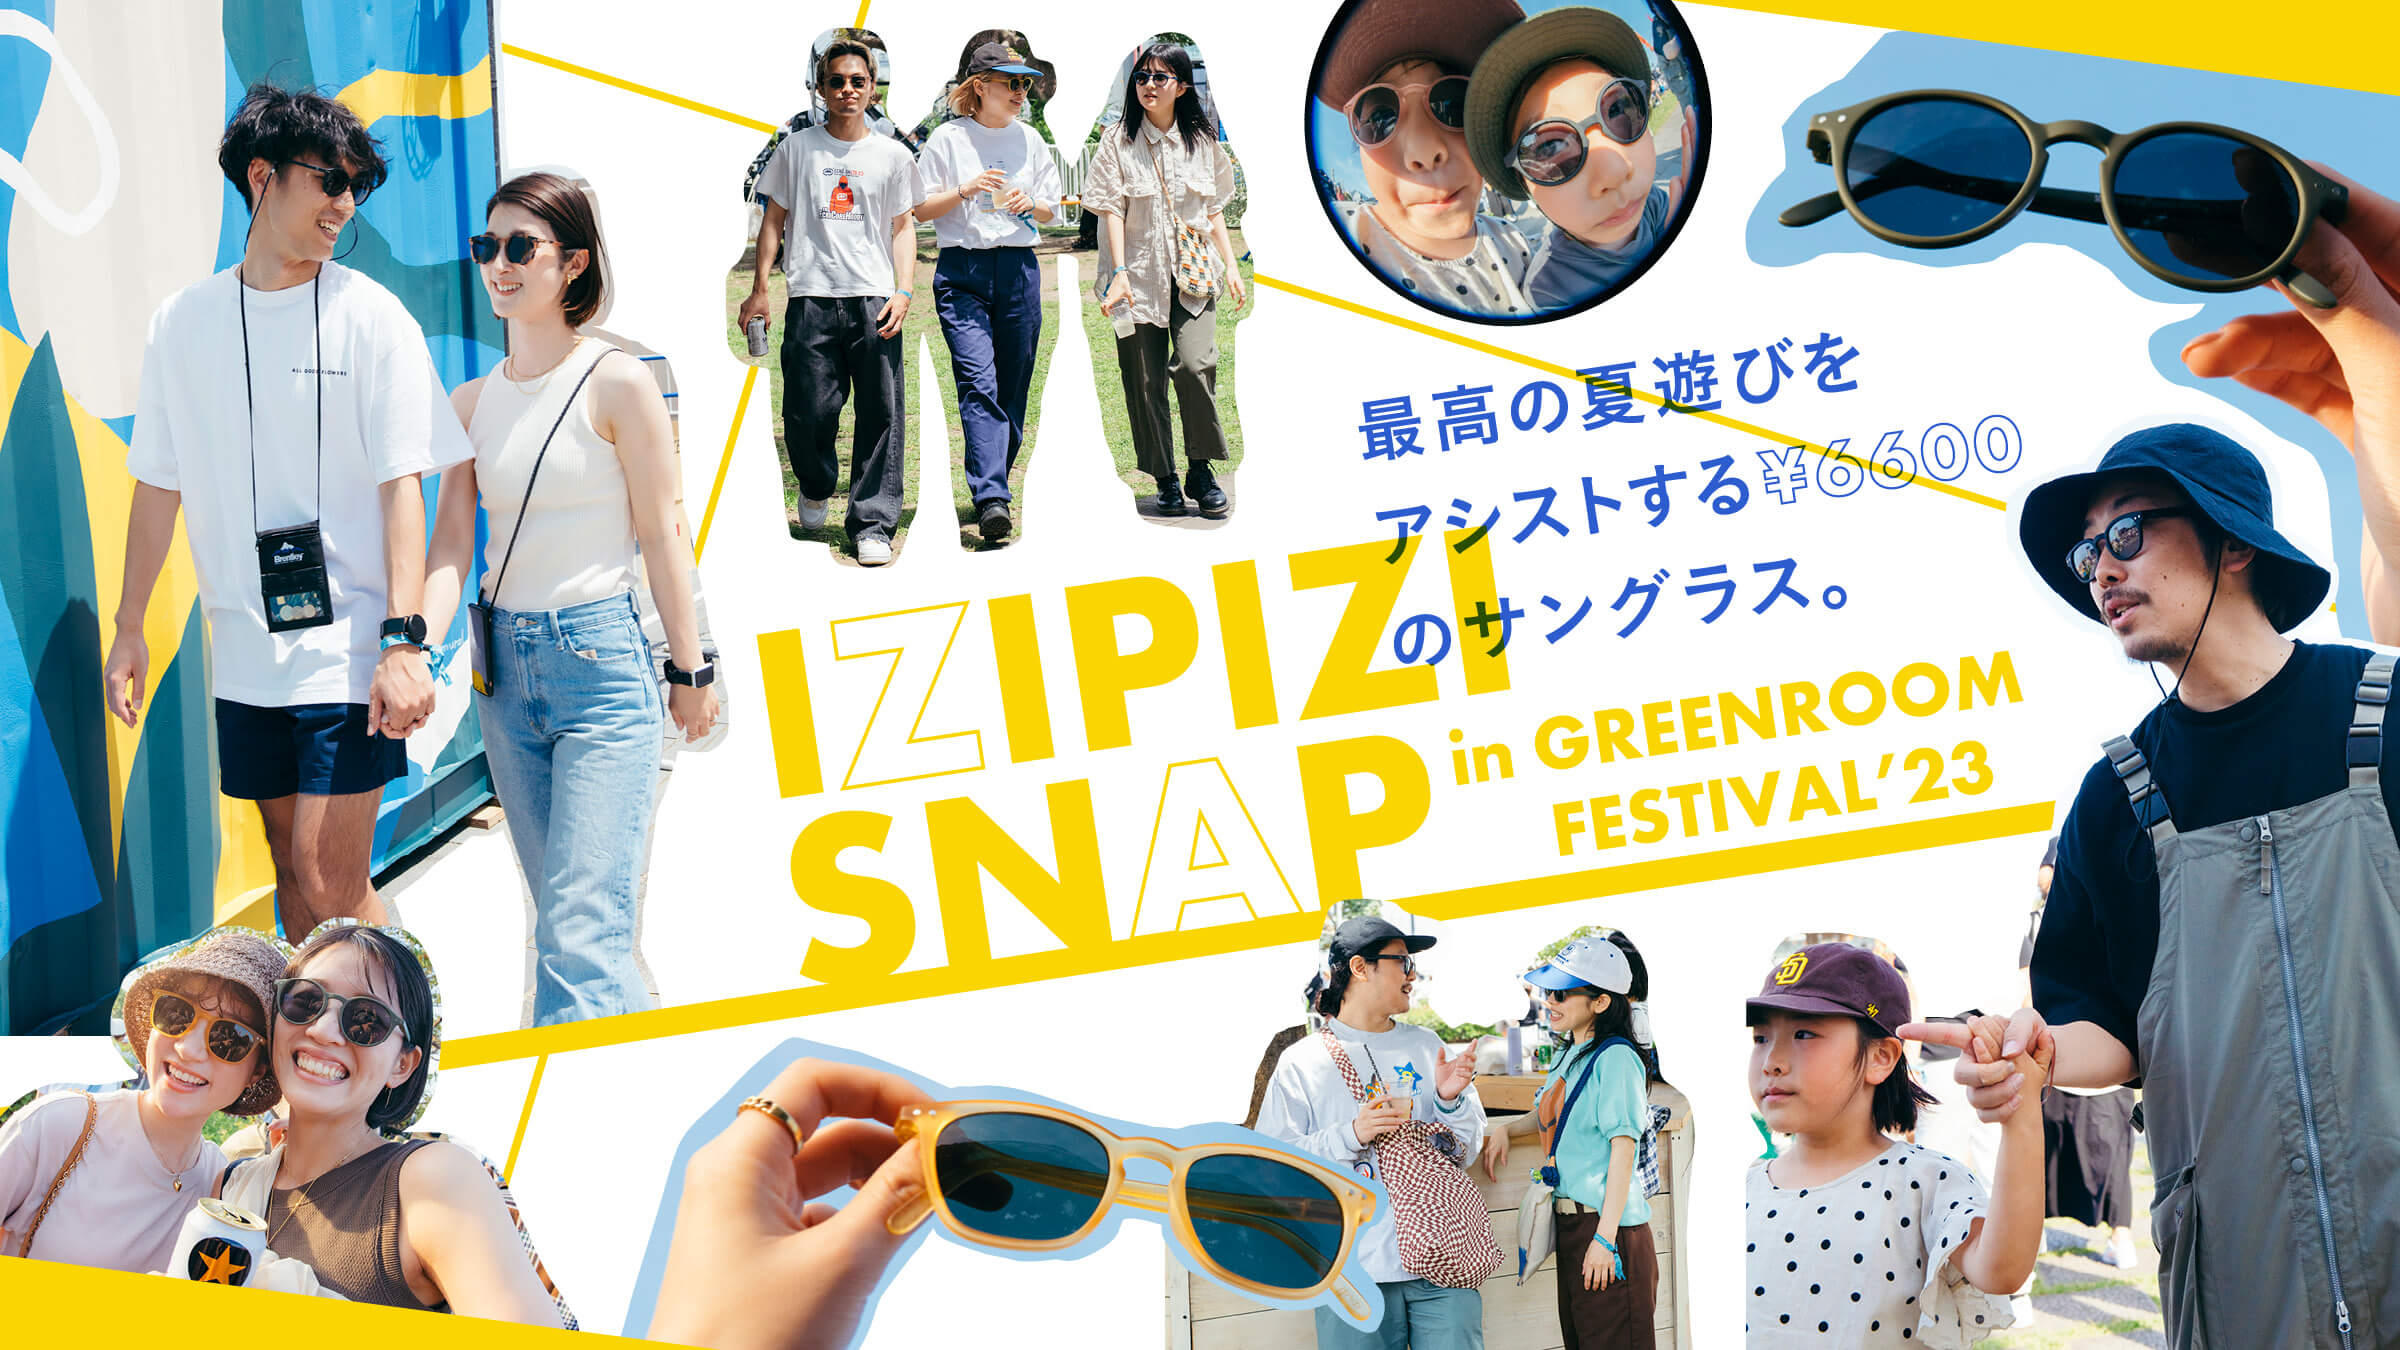 Sunglasses priced at ¥6,600 assist in the best summer fun.